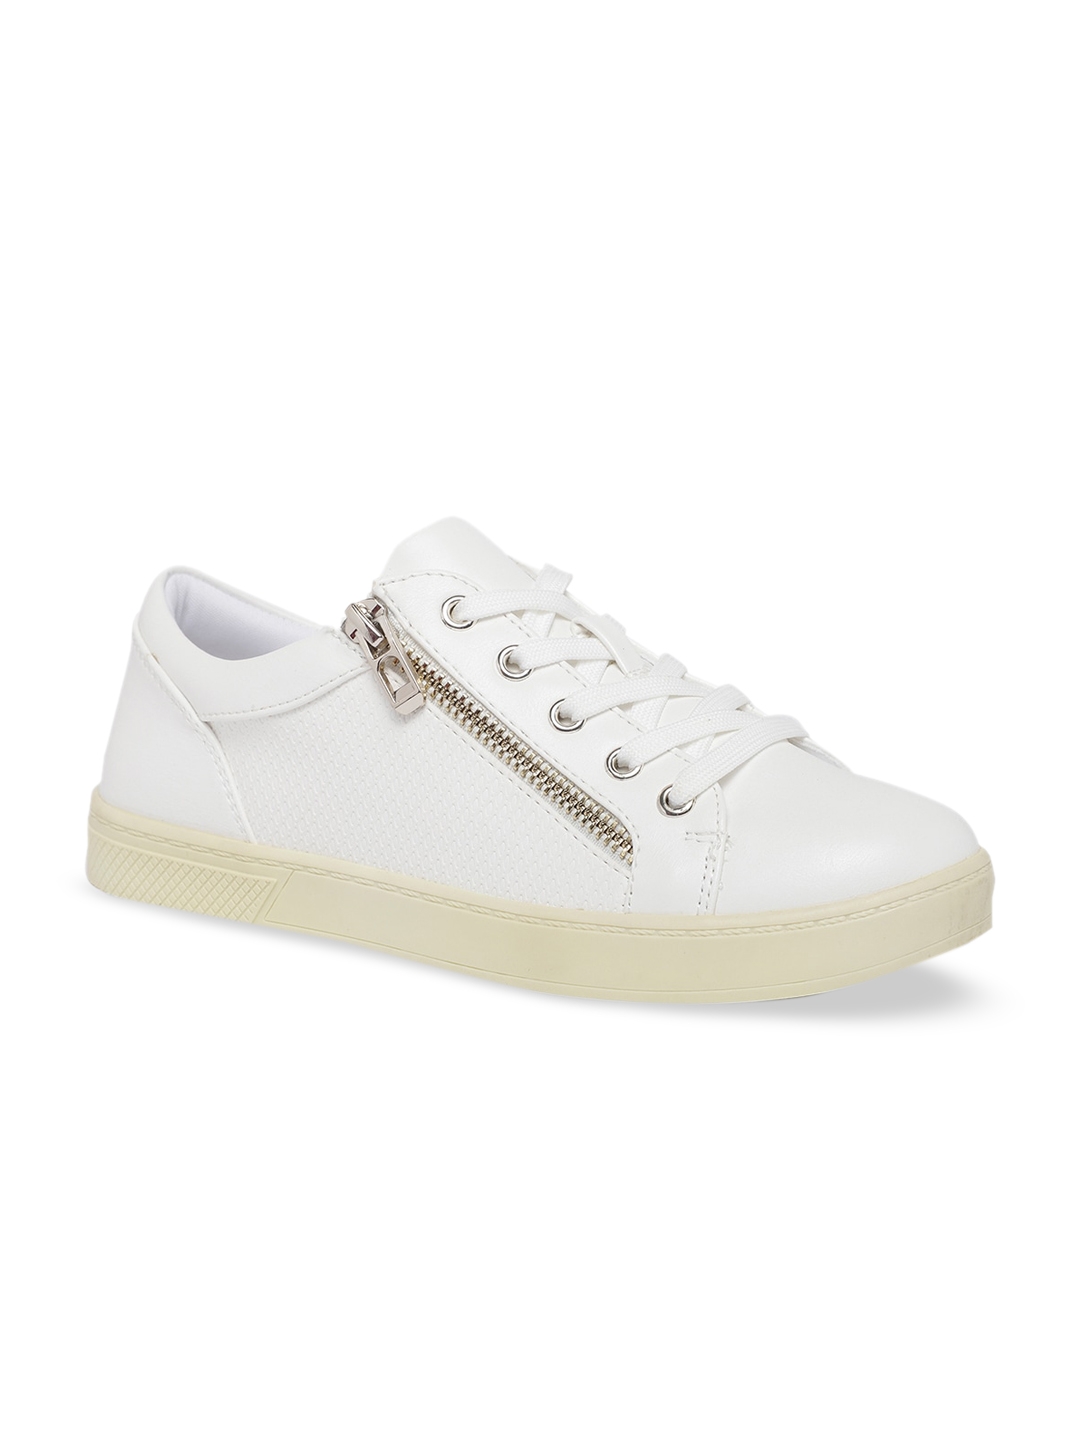 Call It Spring Women White Textured Sneakers